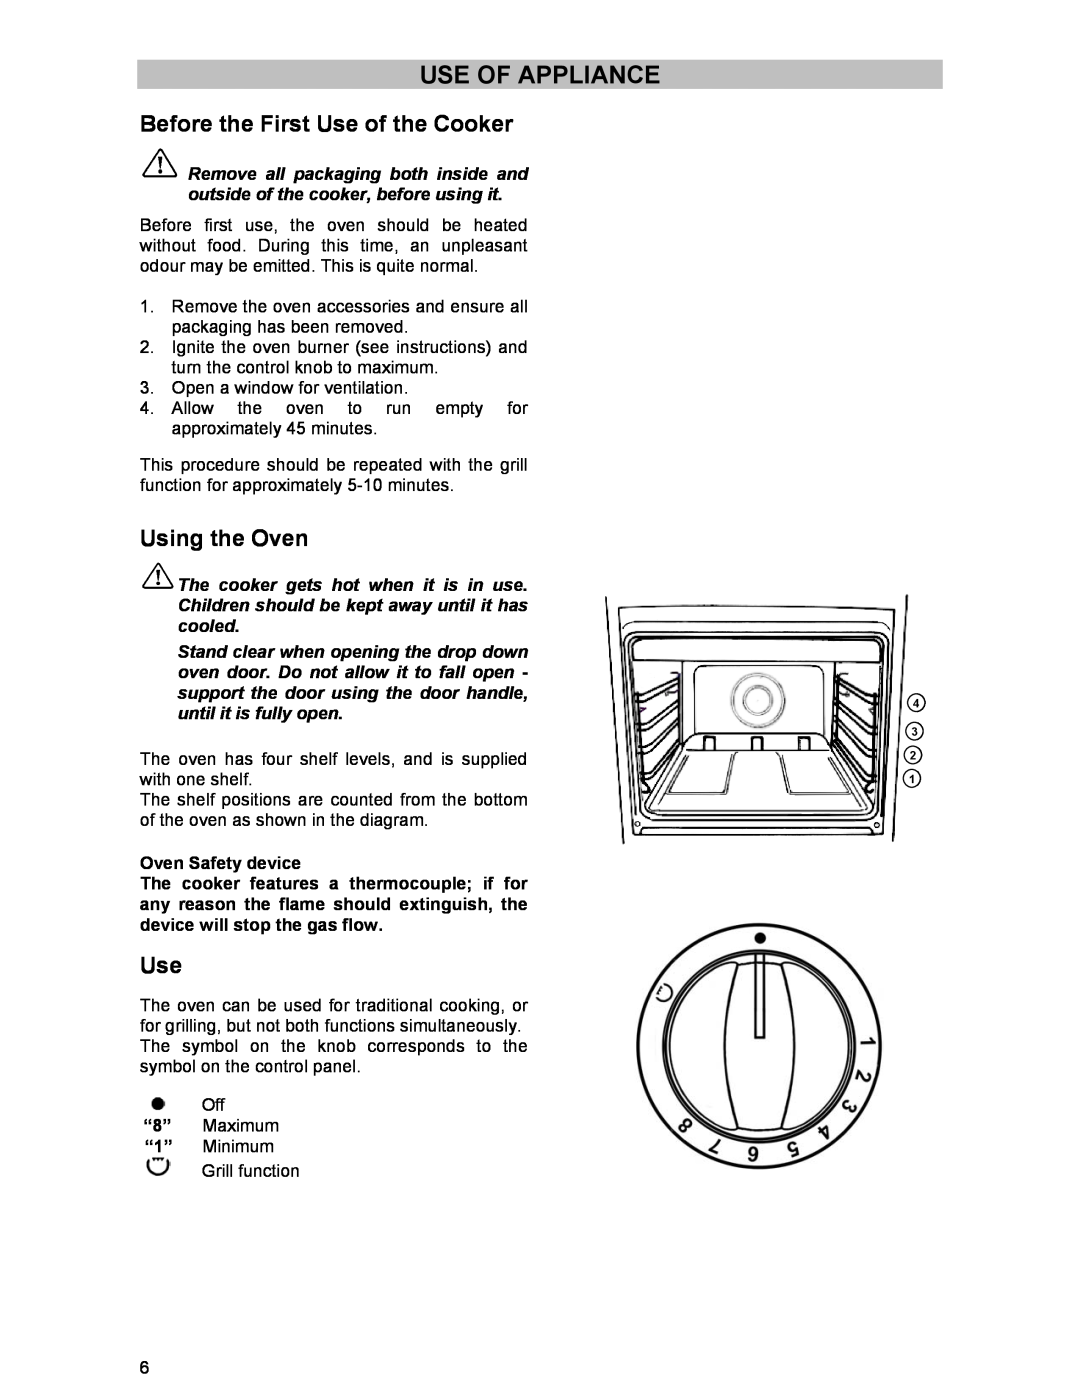 Electrolux SIG 233 manual Use Of Appliance, Before the First Use of the Cooker, Using the Oven 